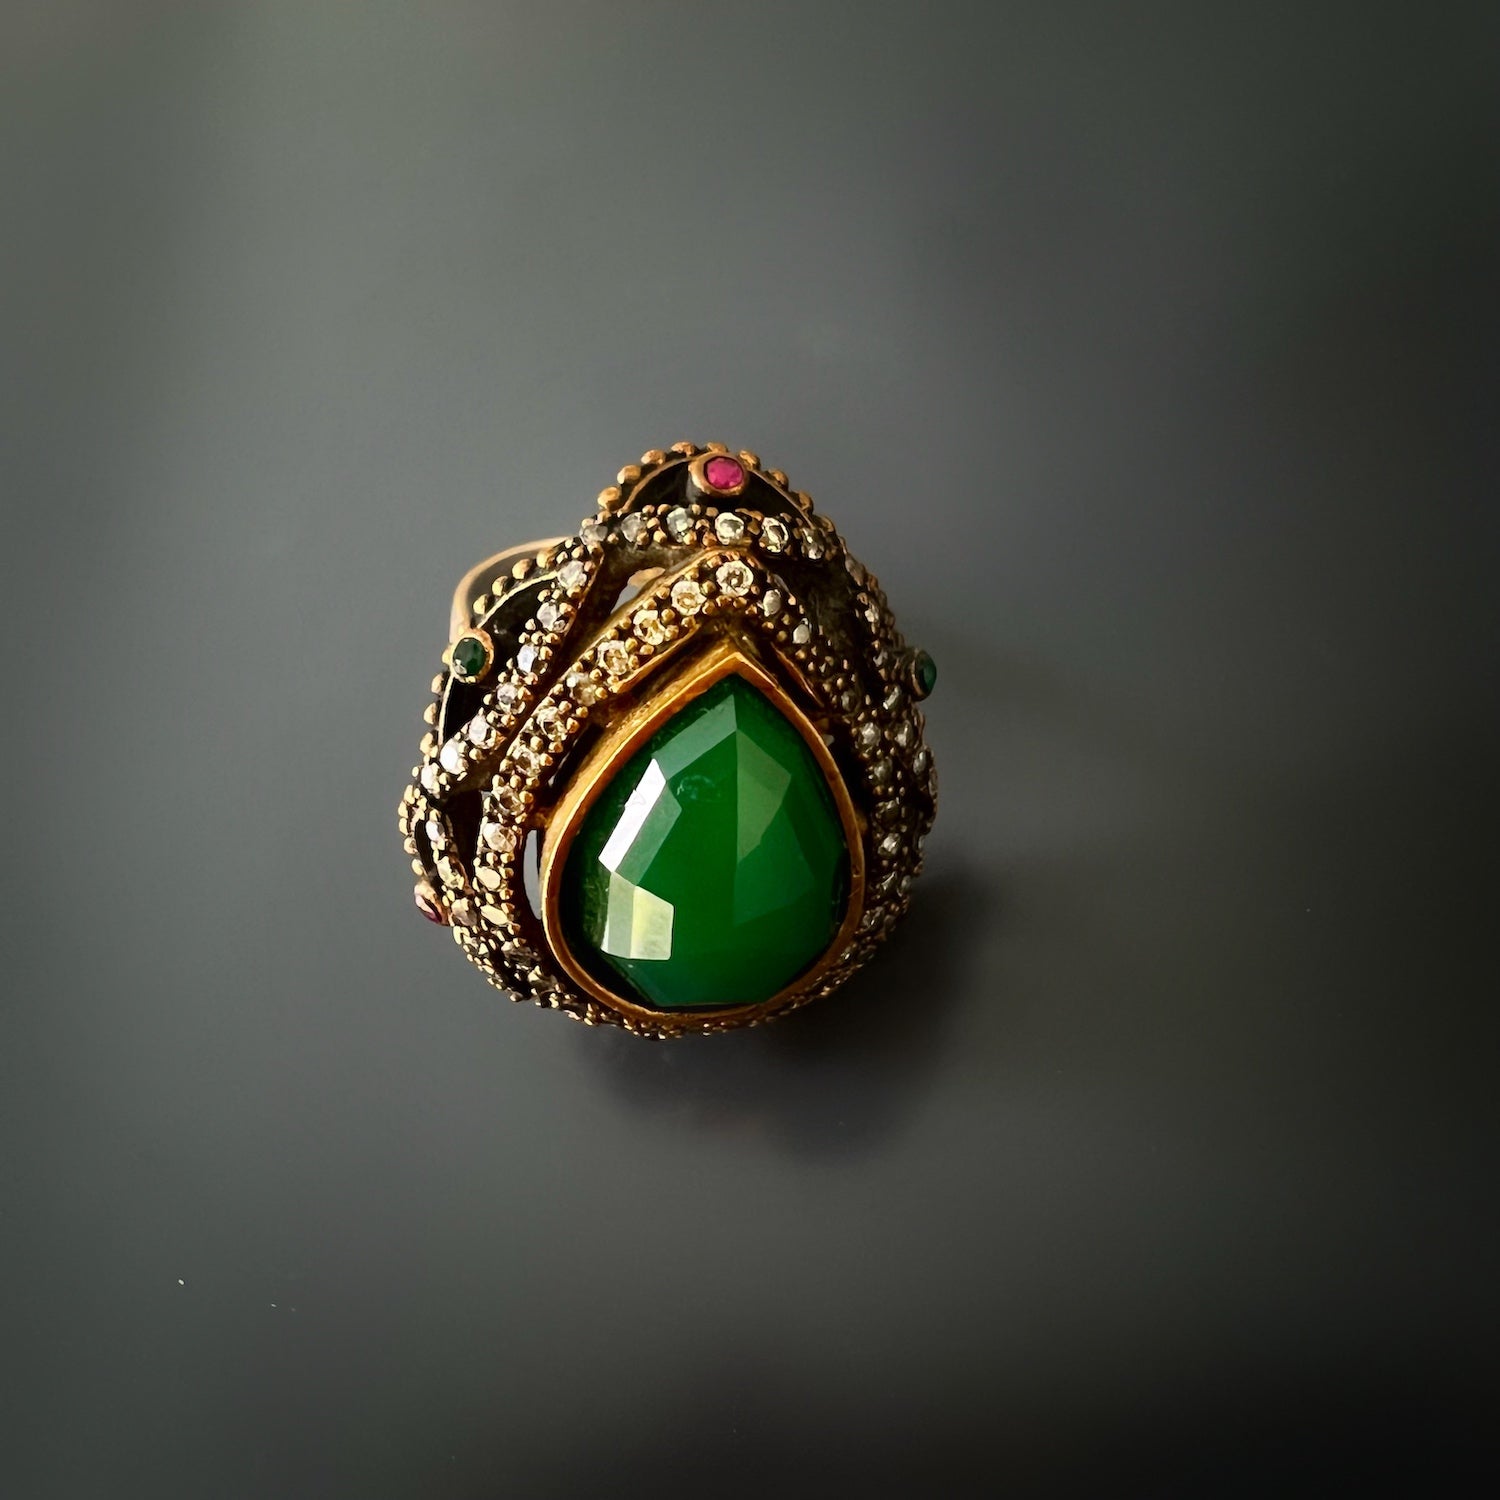 Unique Jade Stone - A one-of-a-kind ring with distinctive natural patterns.